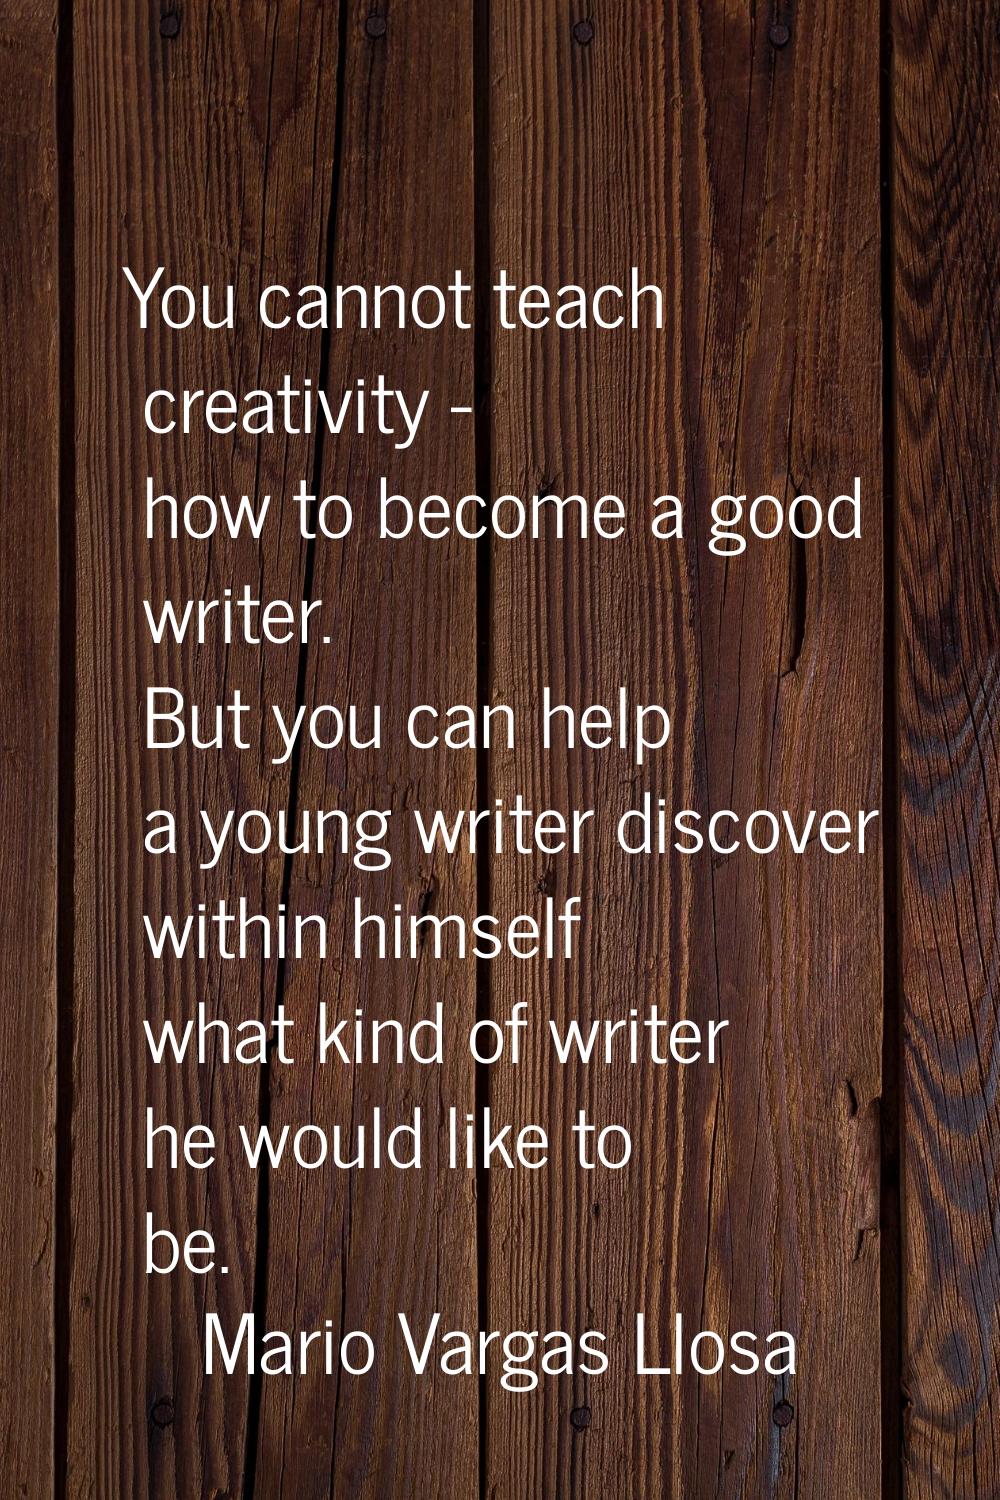 You cannot teach creativity - how to become a good writer. But you can help a young writer discover